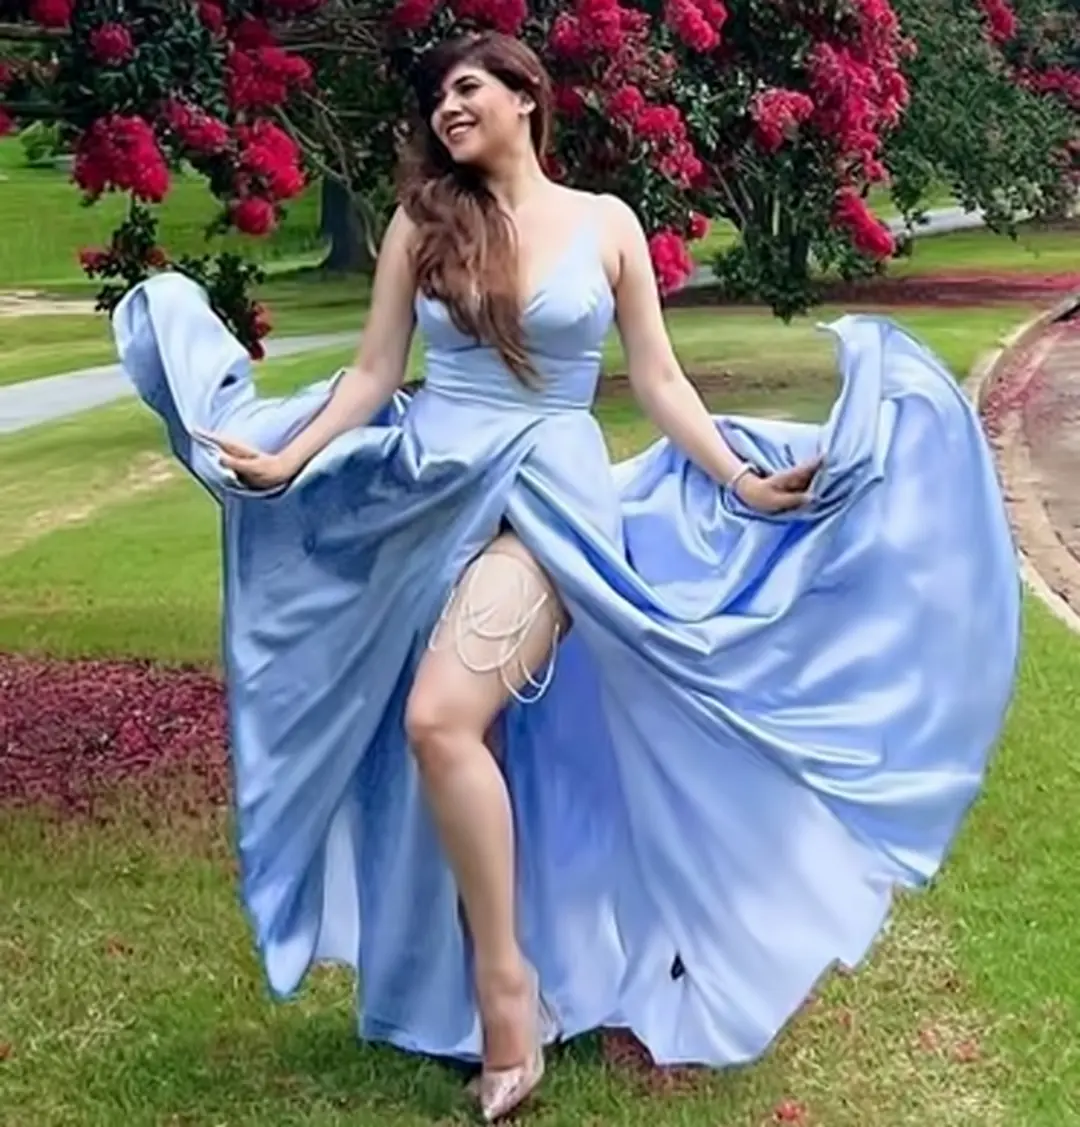 sherin shringar hot photos and video in long gown getting viral